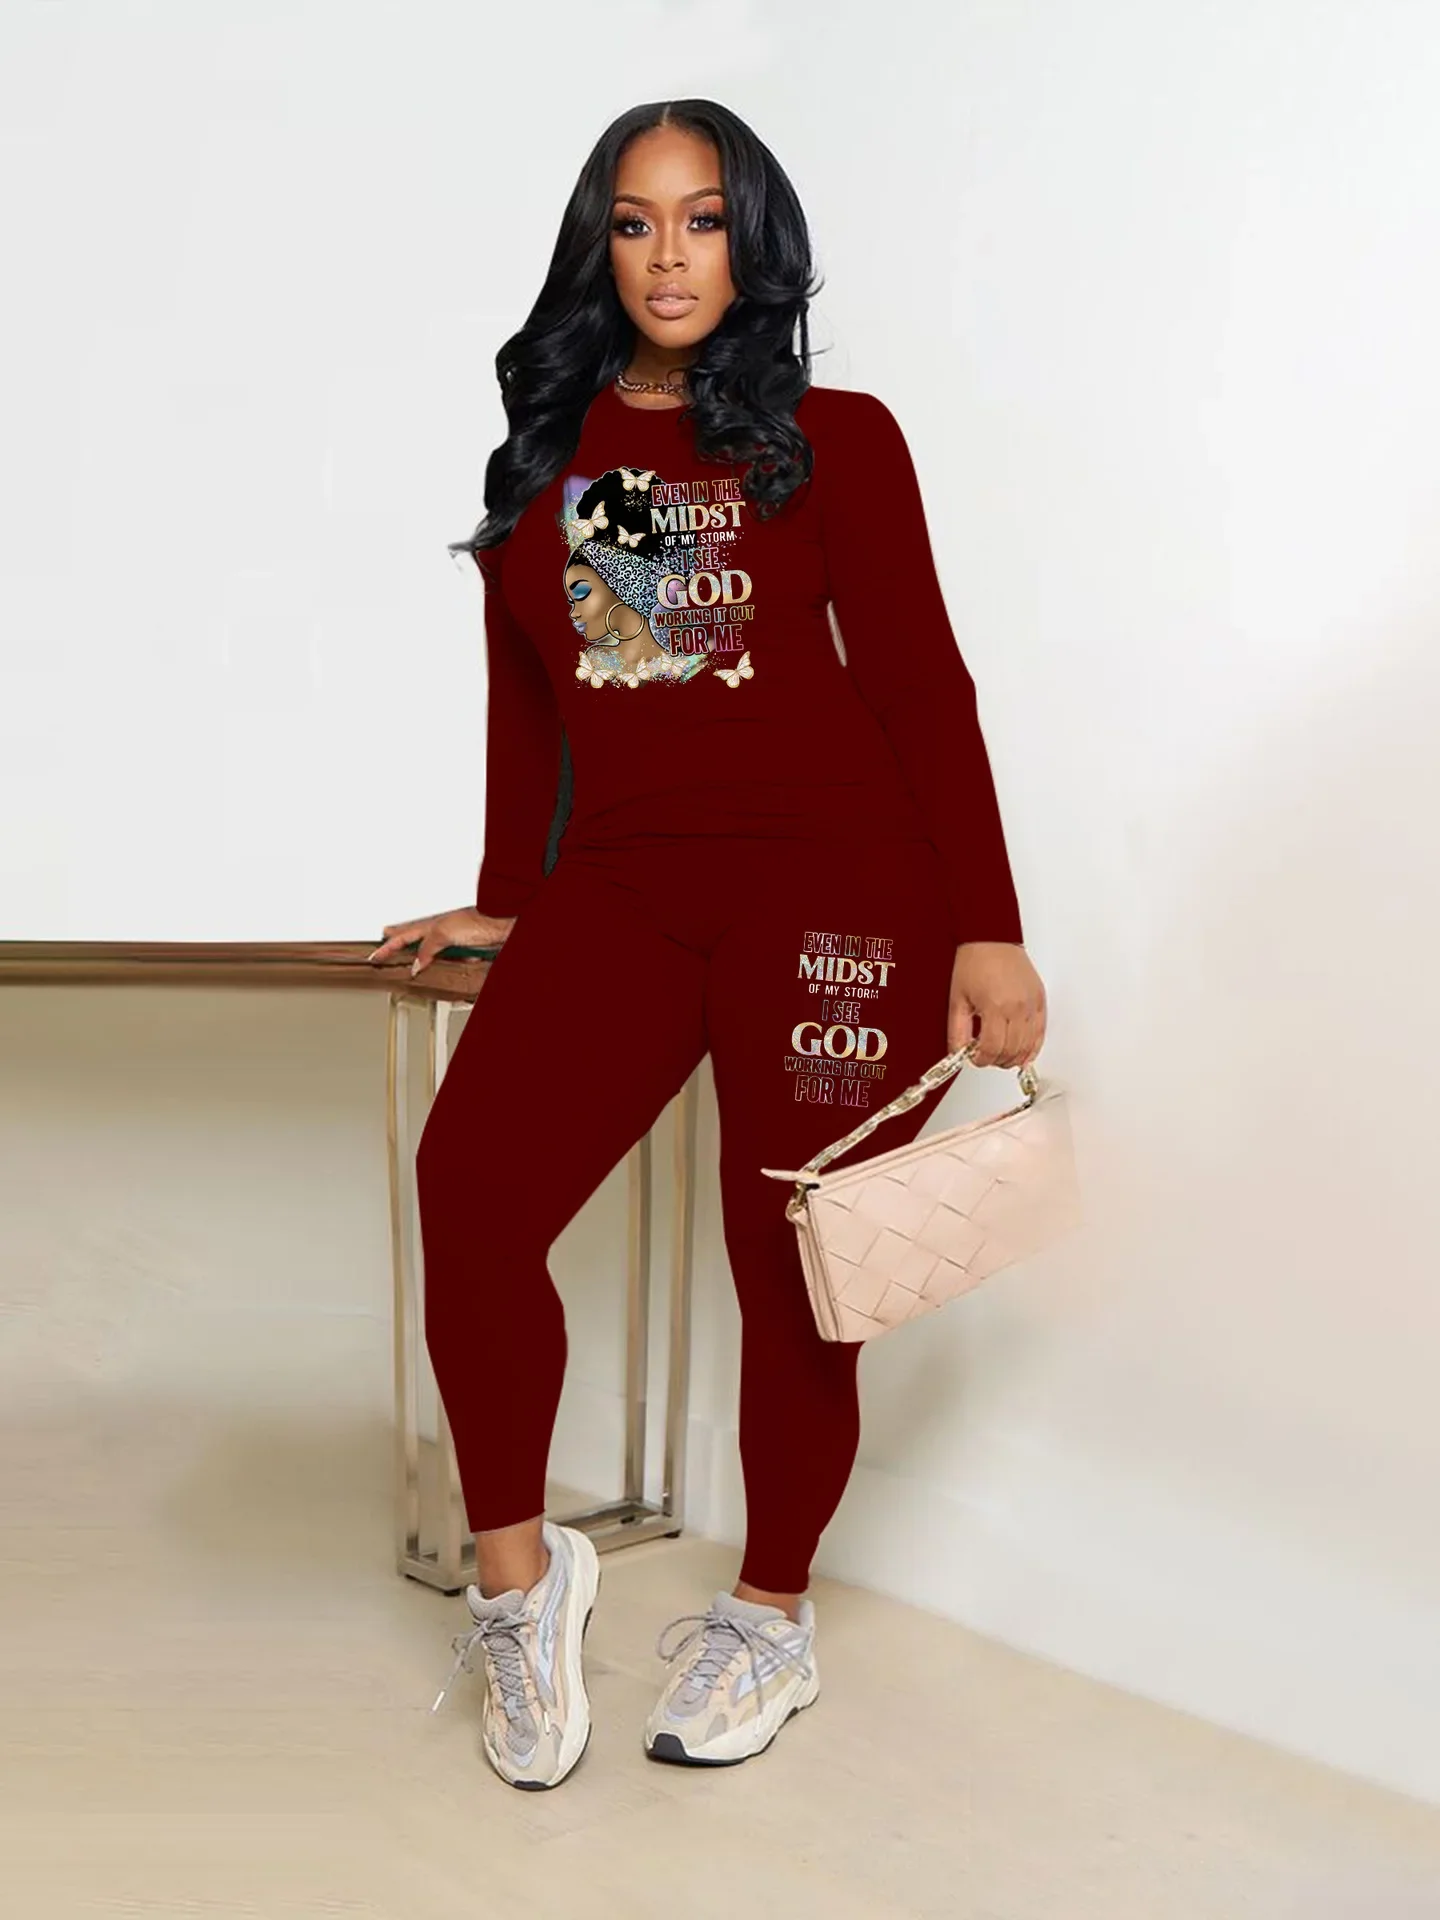 Women's Suit Autumn Fashion Athleisure Long Sleeve Top and Trousers Two Piece Set Printing O-Neck 2 Piece Sets Womens Outfits 2023 summer men s short sleeve shirt cardigan button top 3d printing line trend suit trousers travel casual two piece set